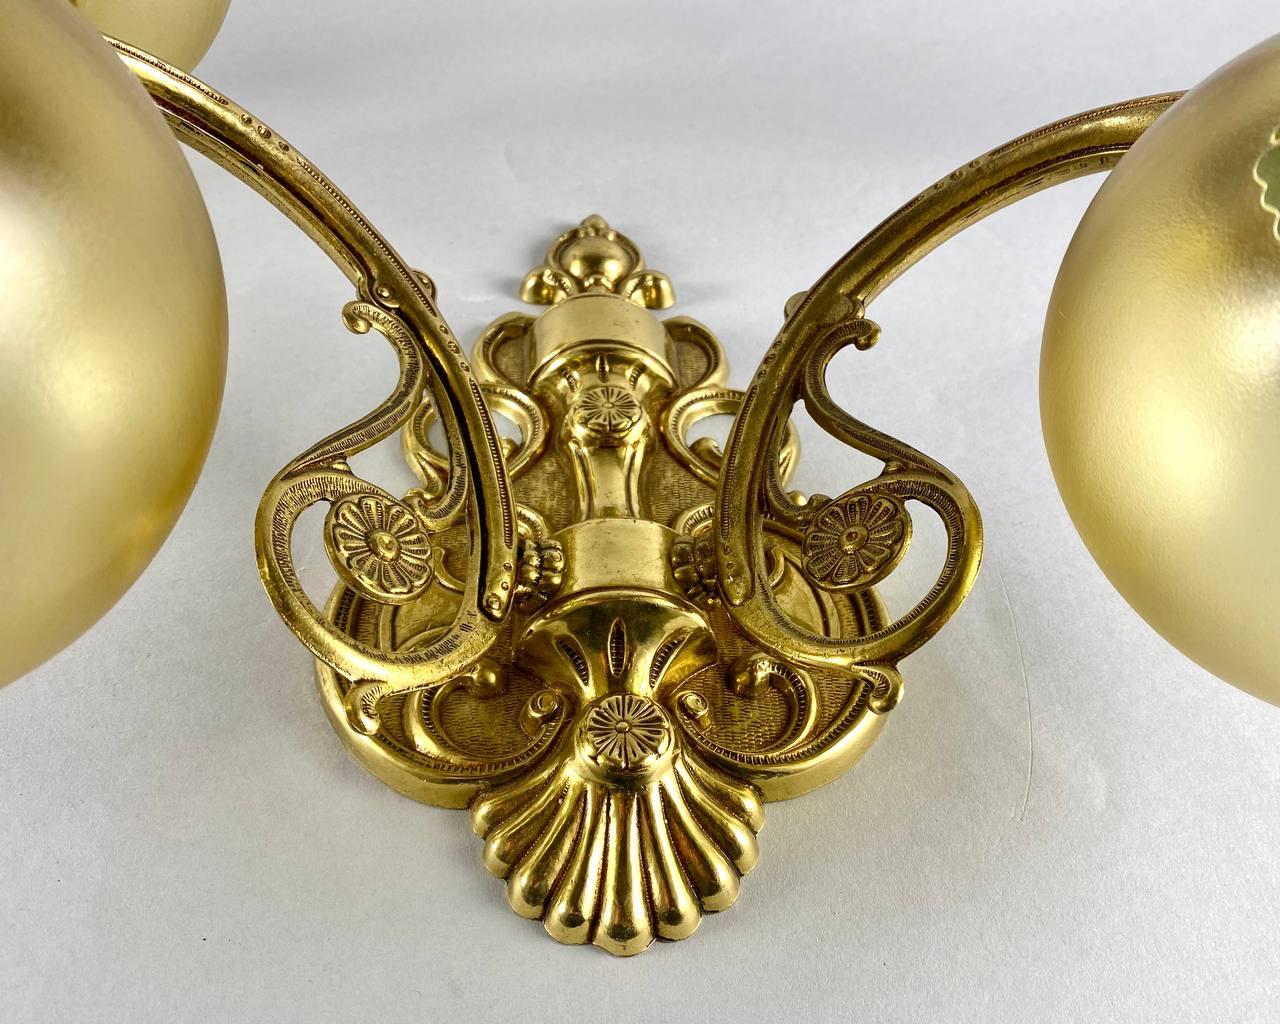 Incredible Art Nouveau style double arm wall sconces are perfect for wall mounting in a living room of classic style.

Body of large wall lamps in brass with cast horns, round glass shades in gold color with a beautiful green floral